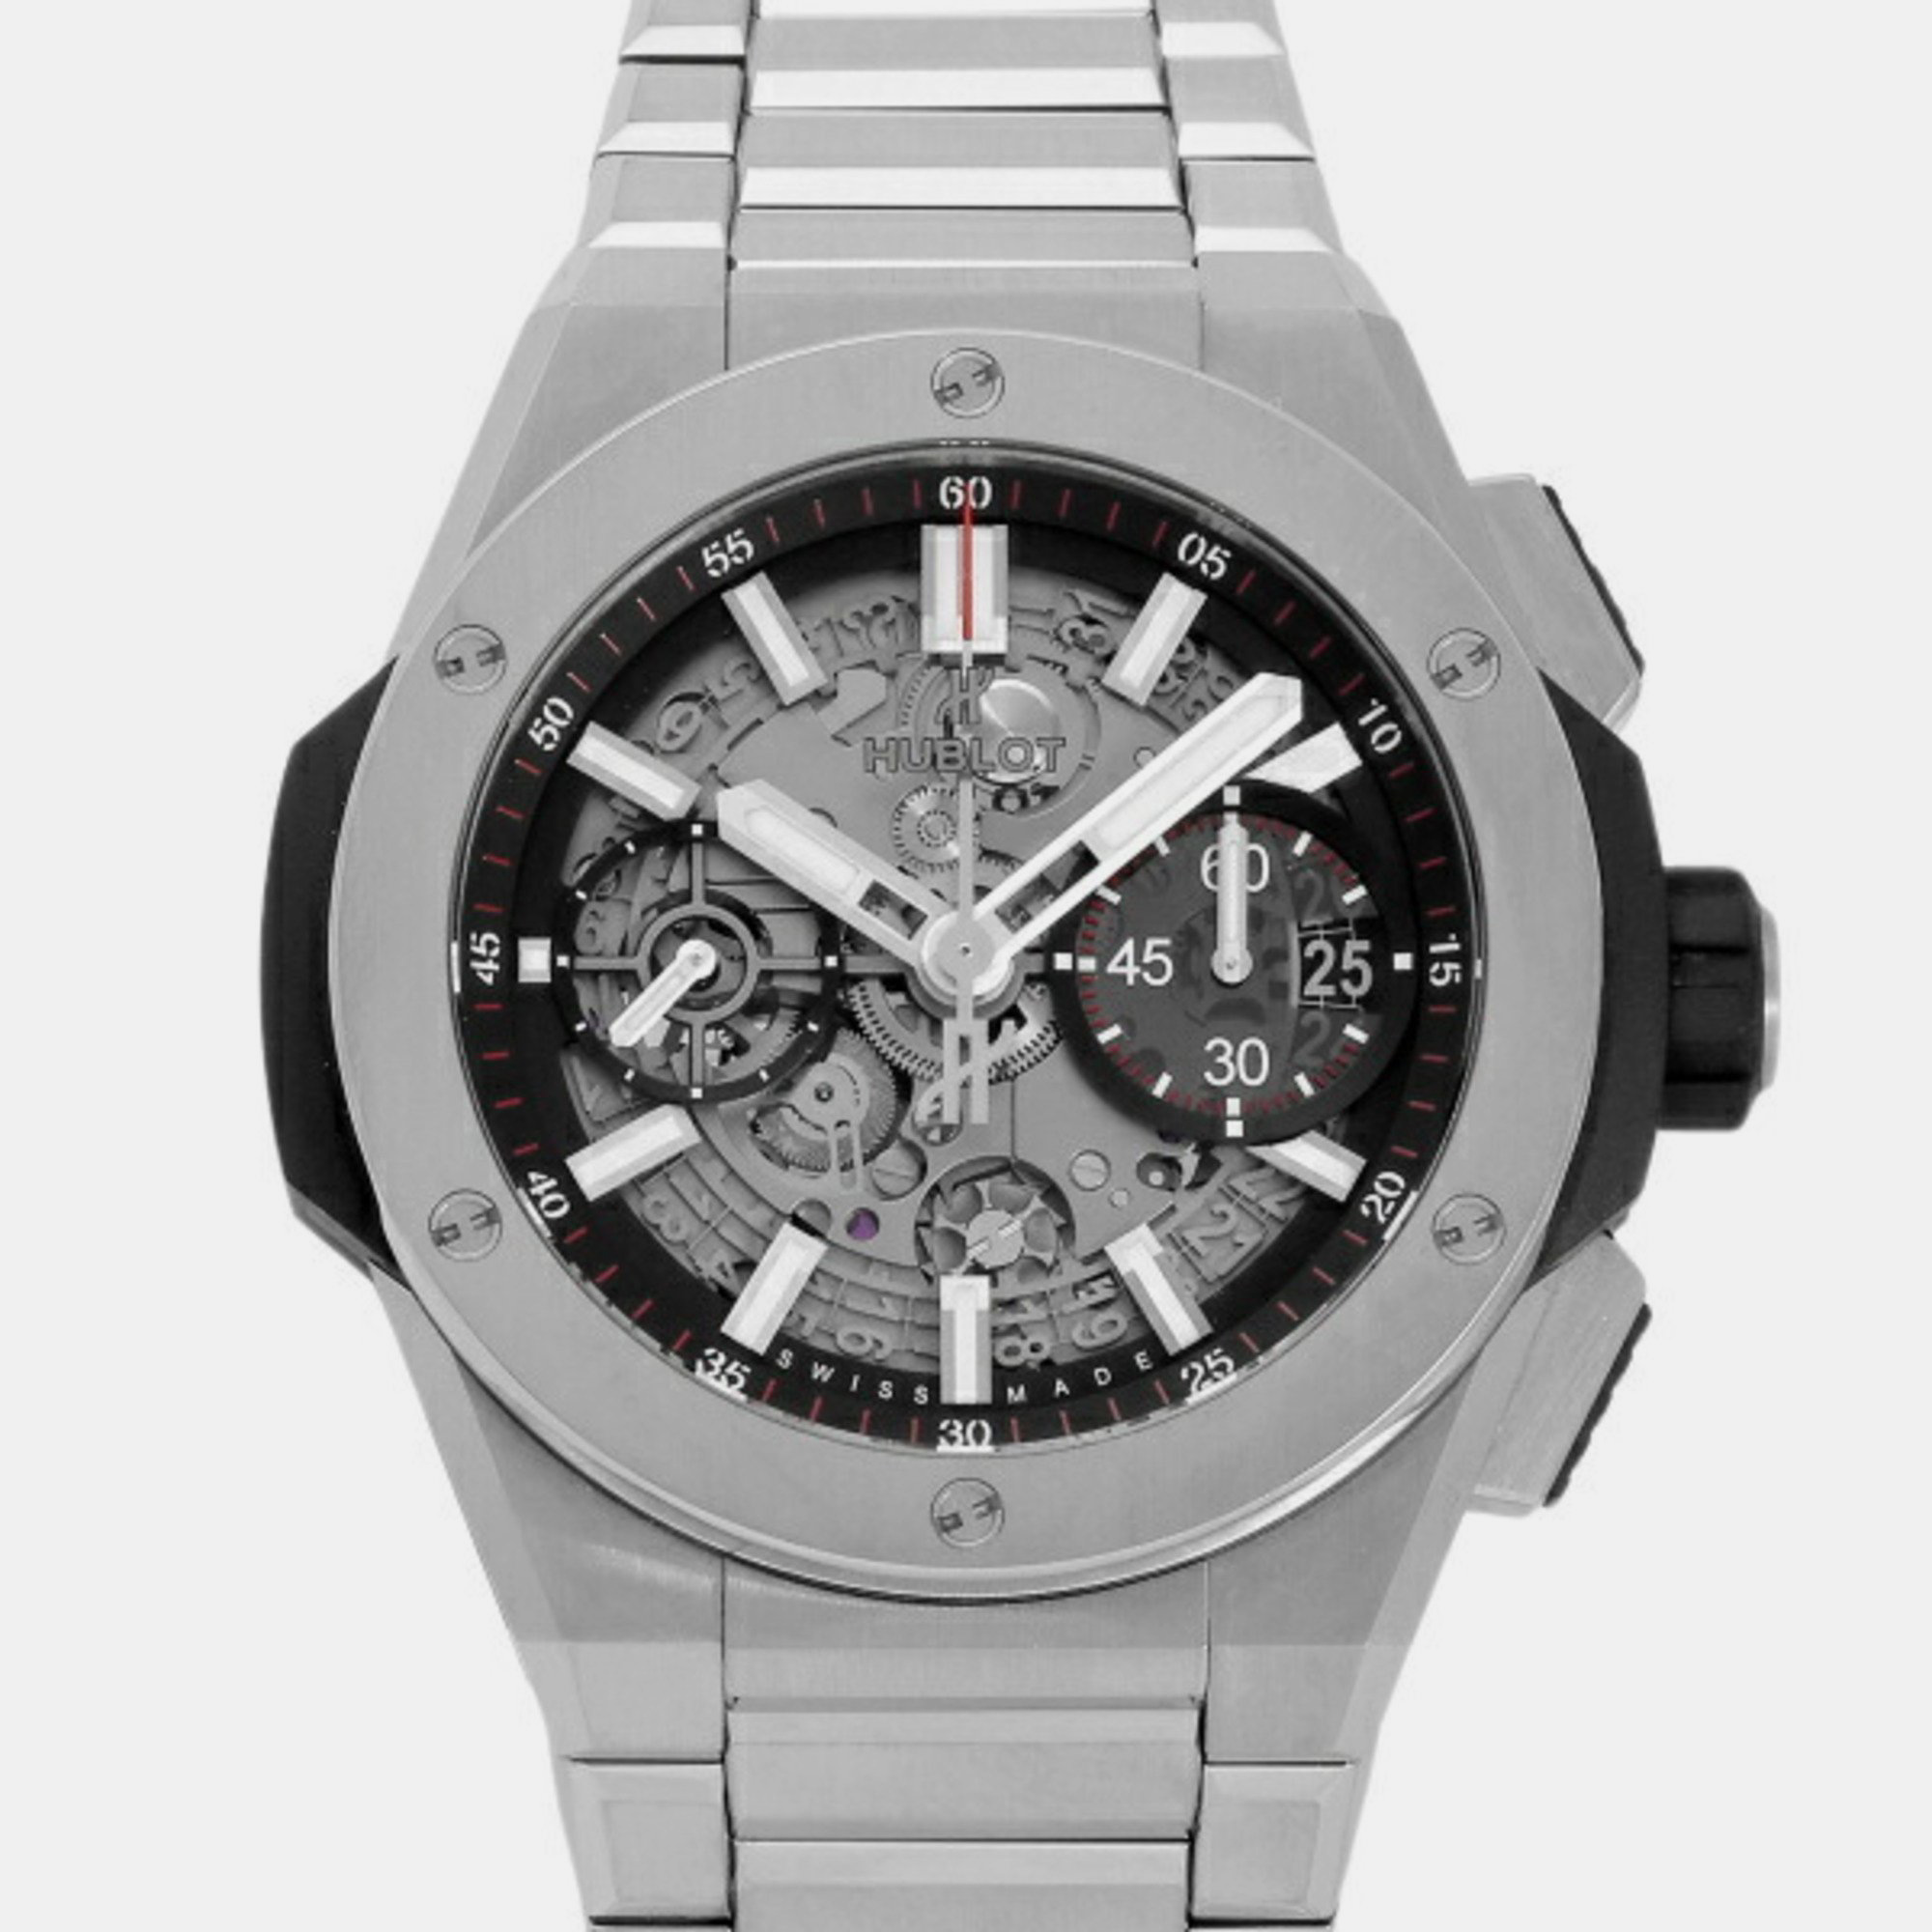 This authentic Hublot watch is characterized by skillful craftsmanship and understated charm. Meticulously constructed to tell time in an elegant way it comes in a sturdy case and flaunts a seamless blend of innovative design and flawless style.